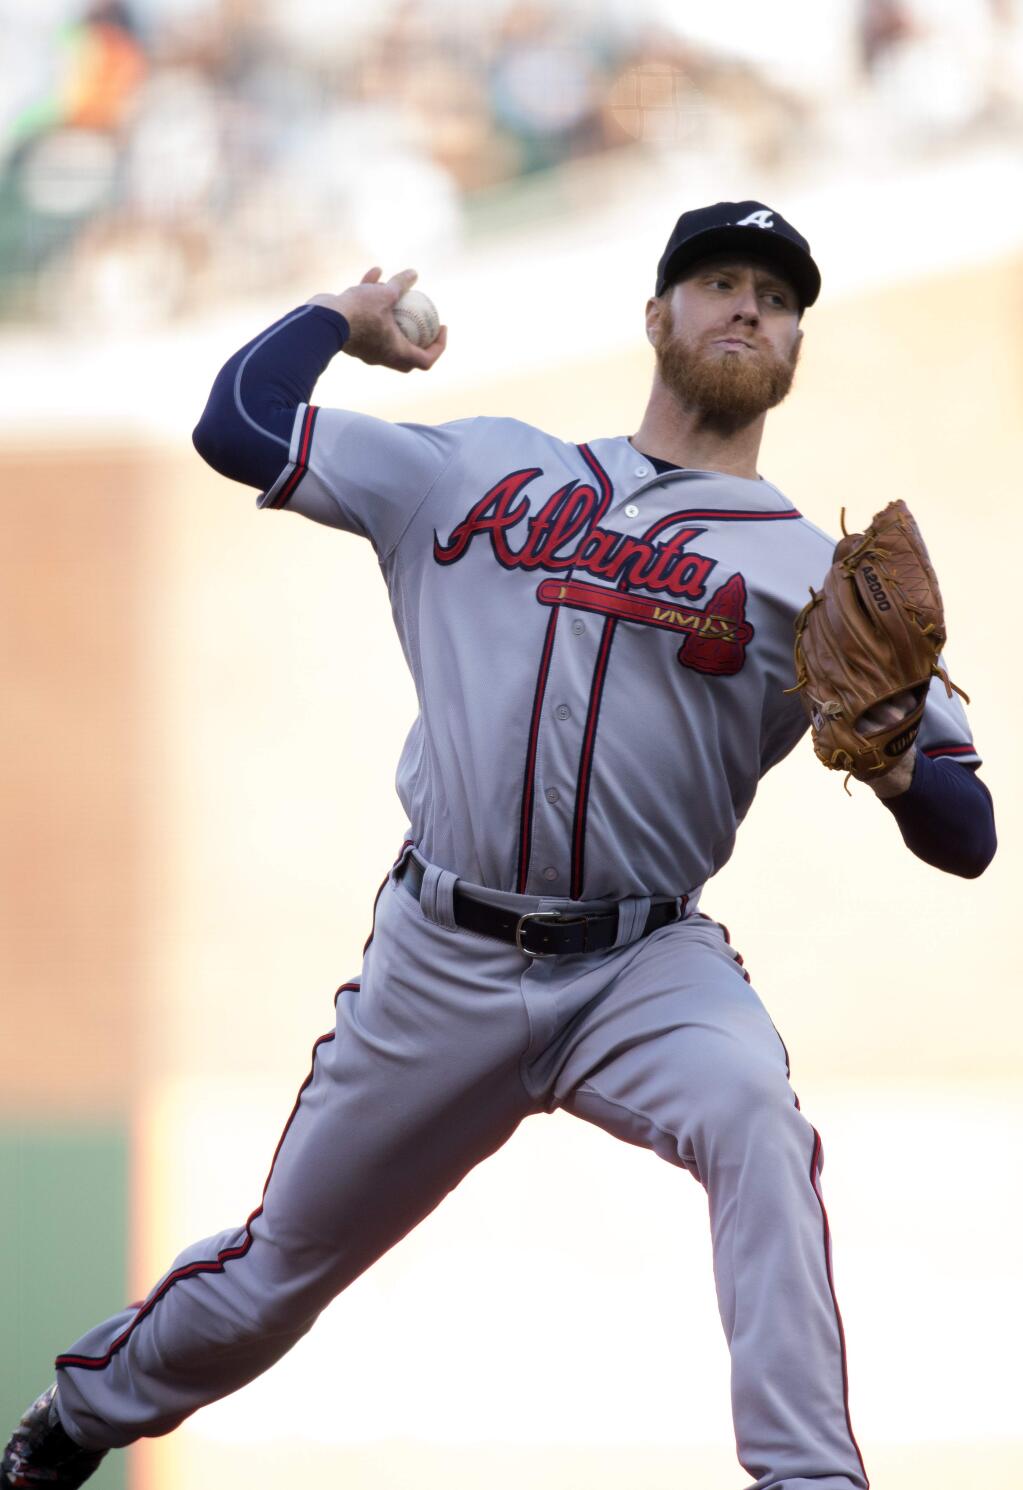 Atlanta Braves starting pitcher Mike Foltynewicz delivers against the San Francisco Giants during the first inning of a baseball game, Saturday, Aug. 27, 2016, in San Francisco. (AP Photo/D. Ross Cameron)